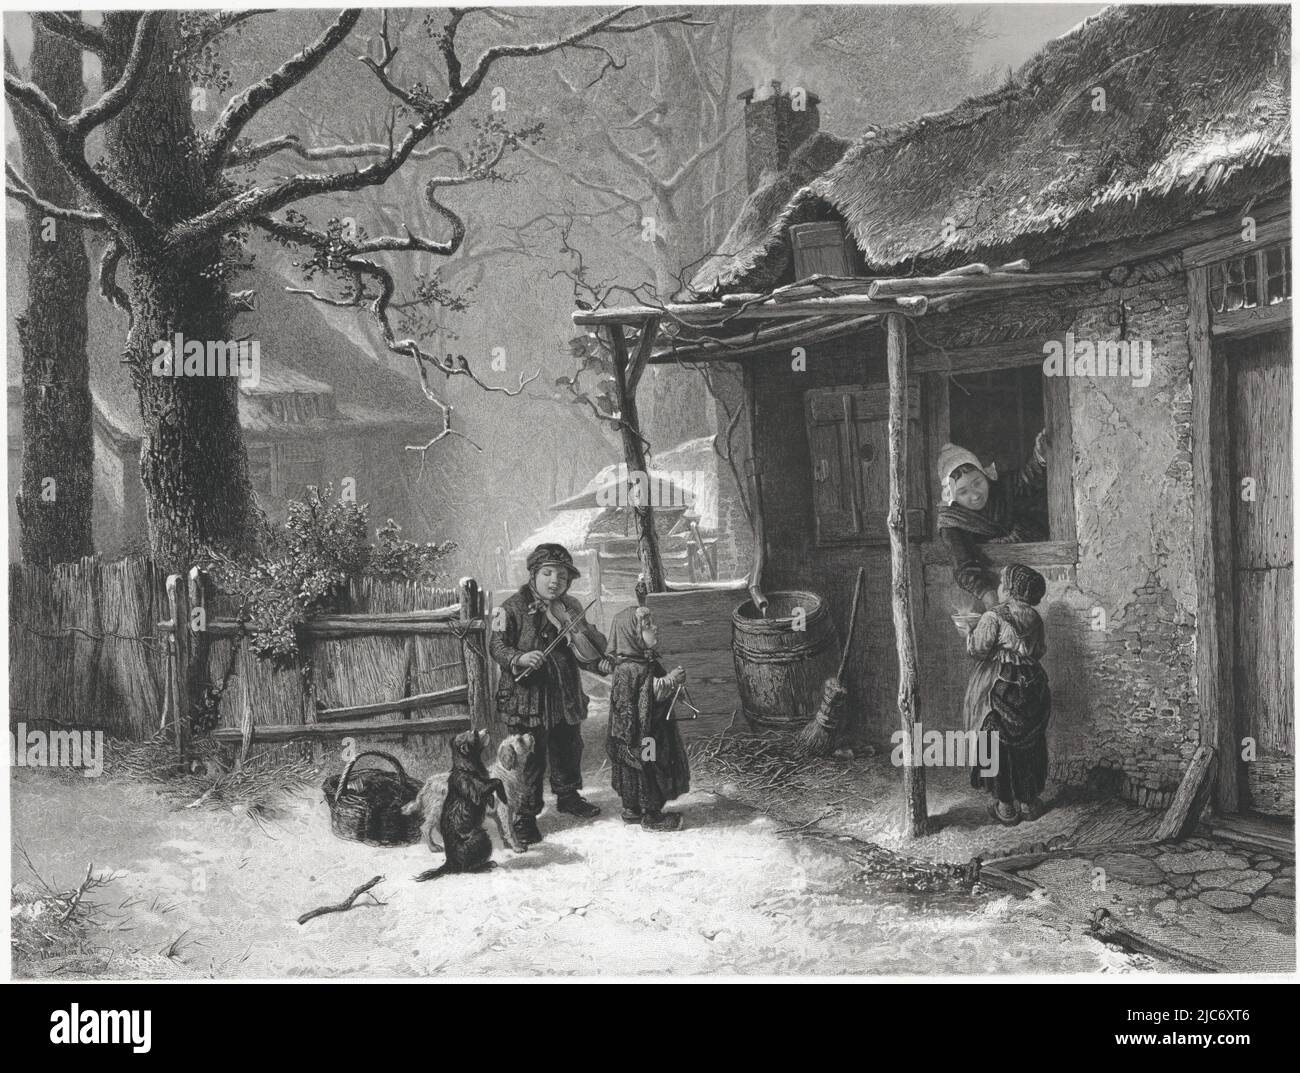 From the door of a thatched farmhouse, a woman bends down to a girl, who holds a steaming bowl in her hands. From the snowy yard, a little girl with a triangle is watching them. Behind her is a boy playing the violin, with beside him two dogs, one of which is doing a trick., Singing Children at a Farm A Christmas Carol , print maker: Dirk Jurriaan Sluyter, (mentioned on object), after: Mari ten Kate, (mentioned on object), publisher: Vereeniging tot Bevordering van Beeldende Kunsten, (mentioned on object), Amsterdam, 1841 - 1886, paper, etching, h 650 mm × w 547 mm Stock Photo